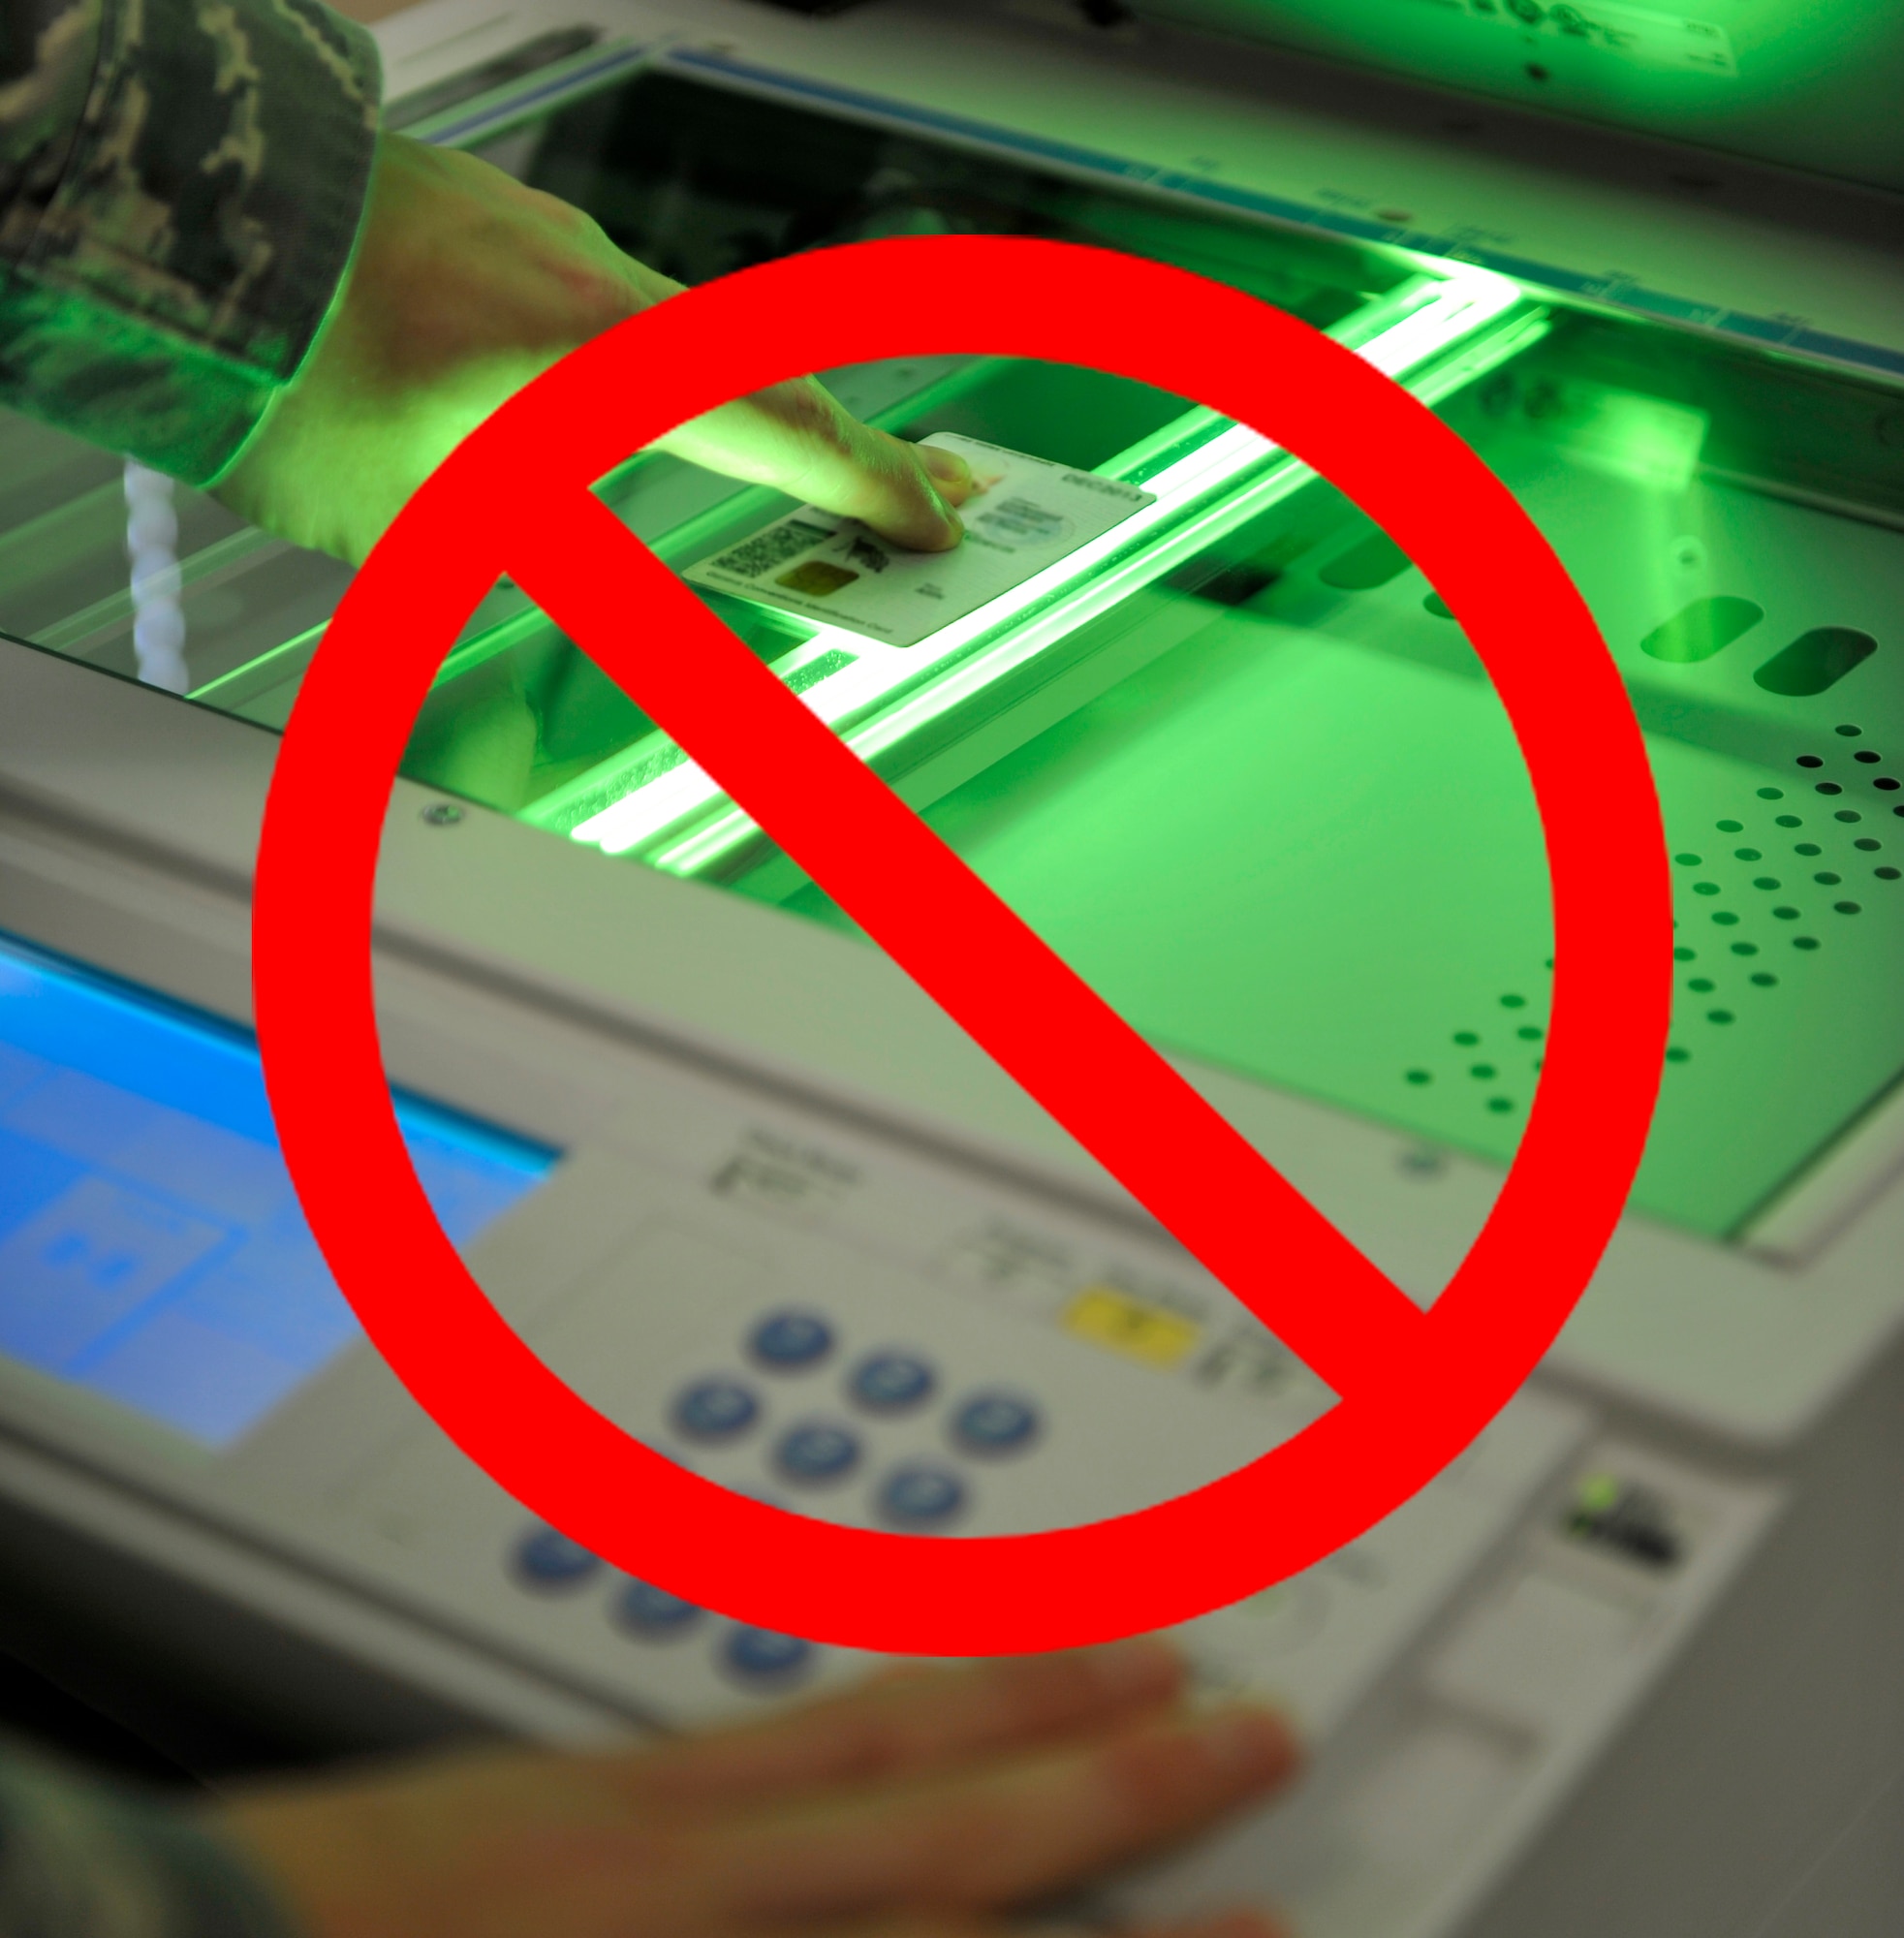 Photocopying CAC cards is illegal and punishable by fine or imprisonment. (U.S. Air Force photo illustration by Senior Airman Caleb Pierce)